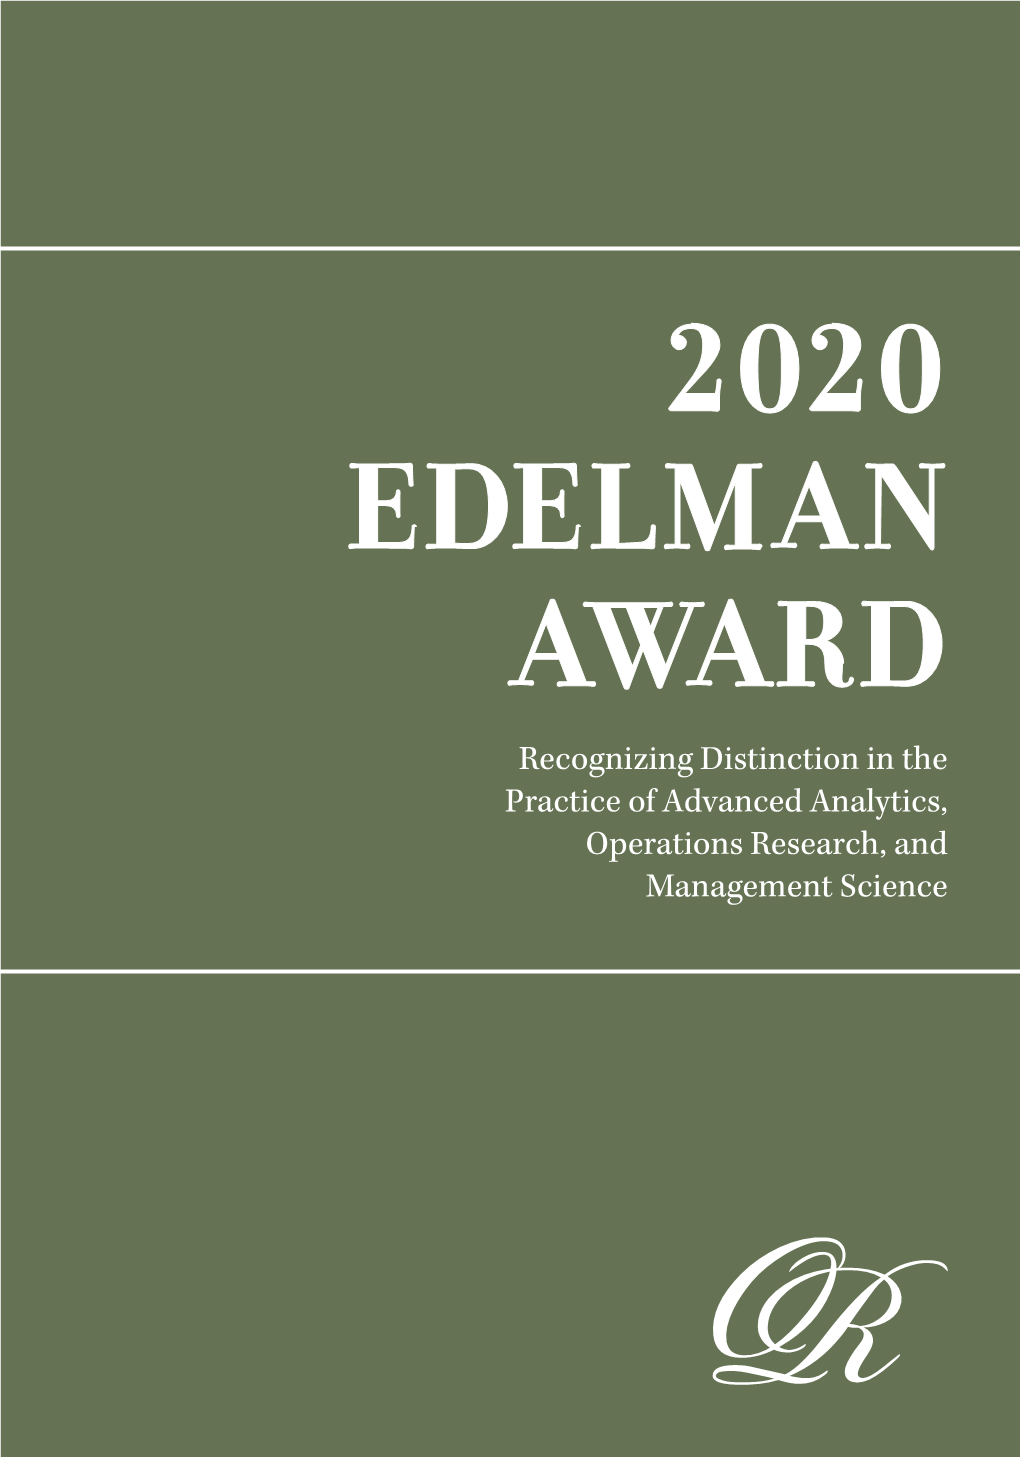 2020 EDELMAN AWARD Recognizing Distinction in the Practice of Advanced Analytics, Operations Research, and Management Science 2020 EDELMAN PROGRAM NOTES